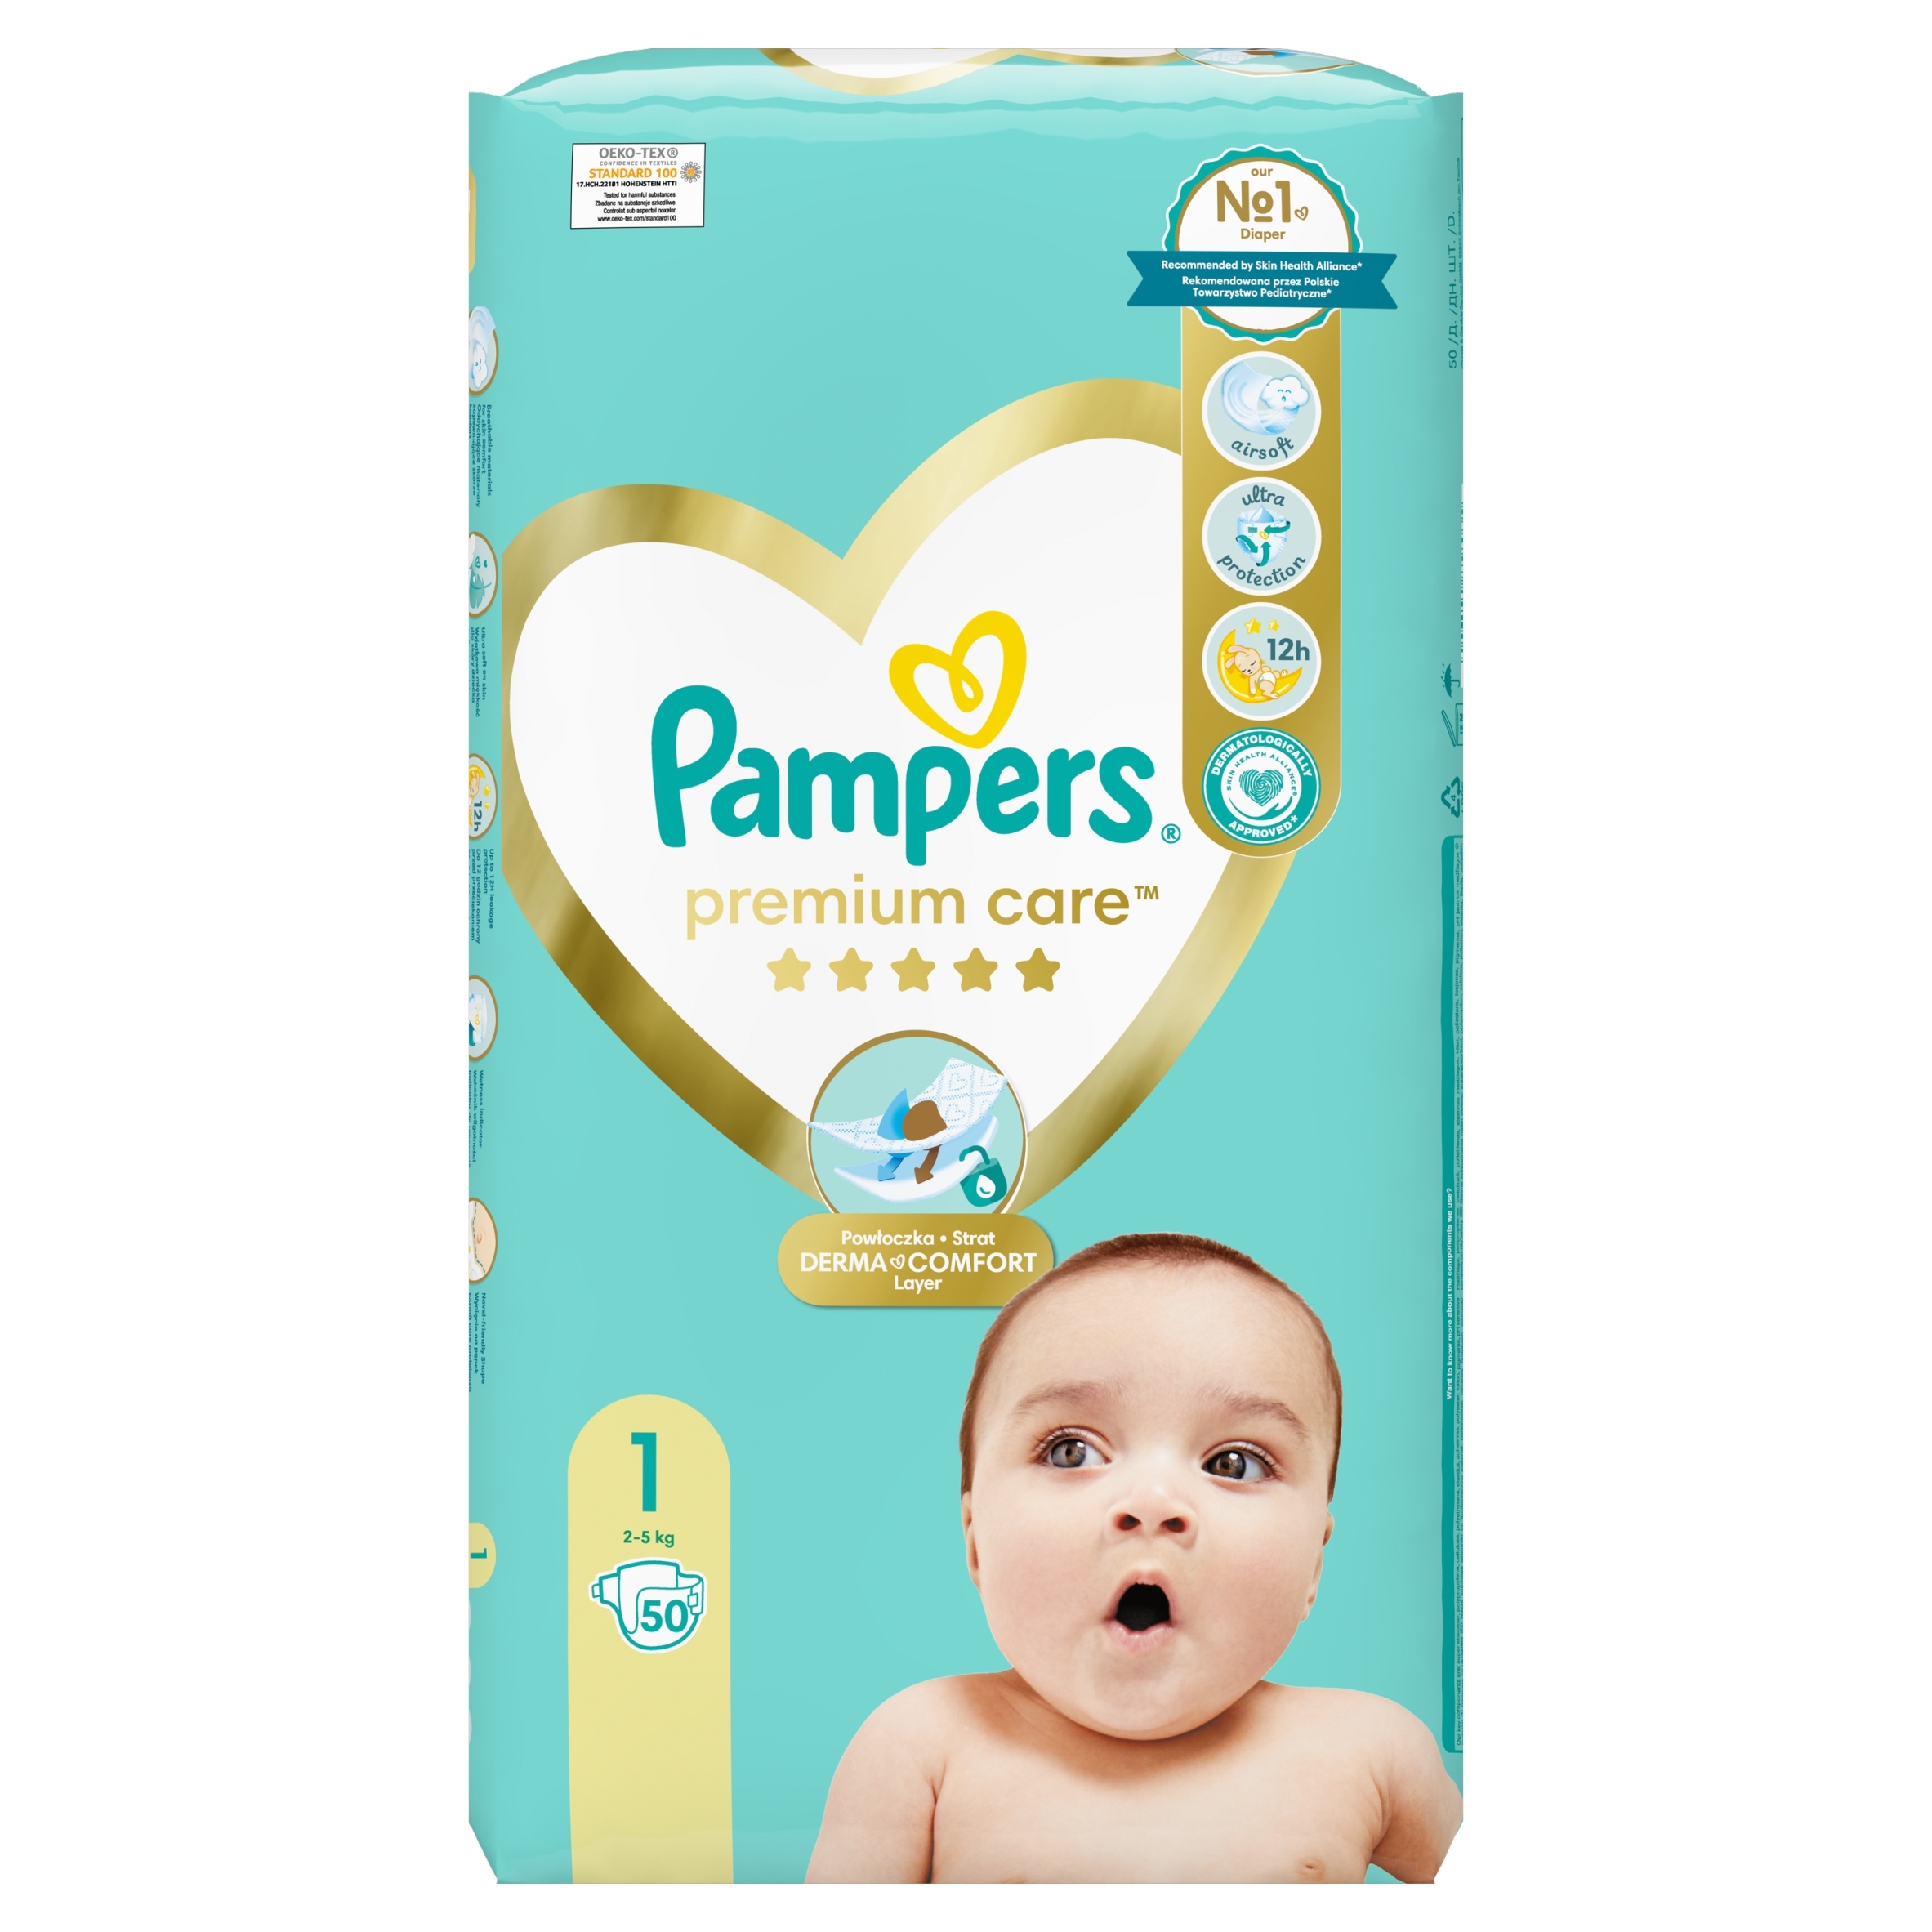 pampers soft care wipes